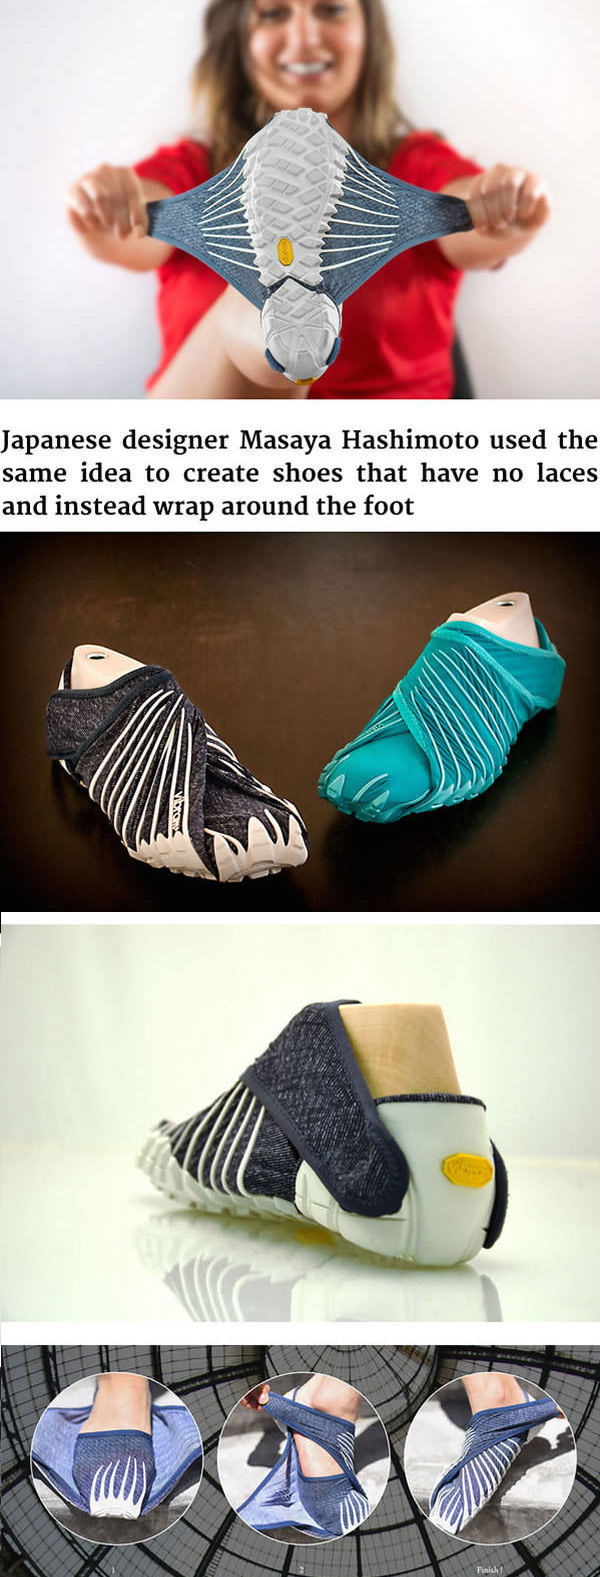 Shoes that you wrap around your feet instead of putting on.